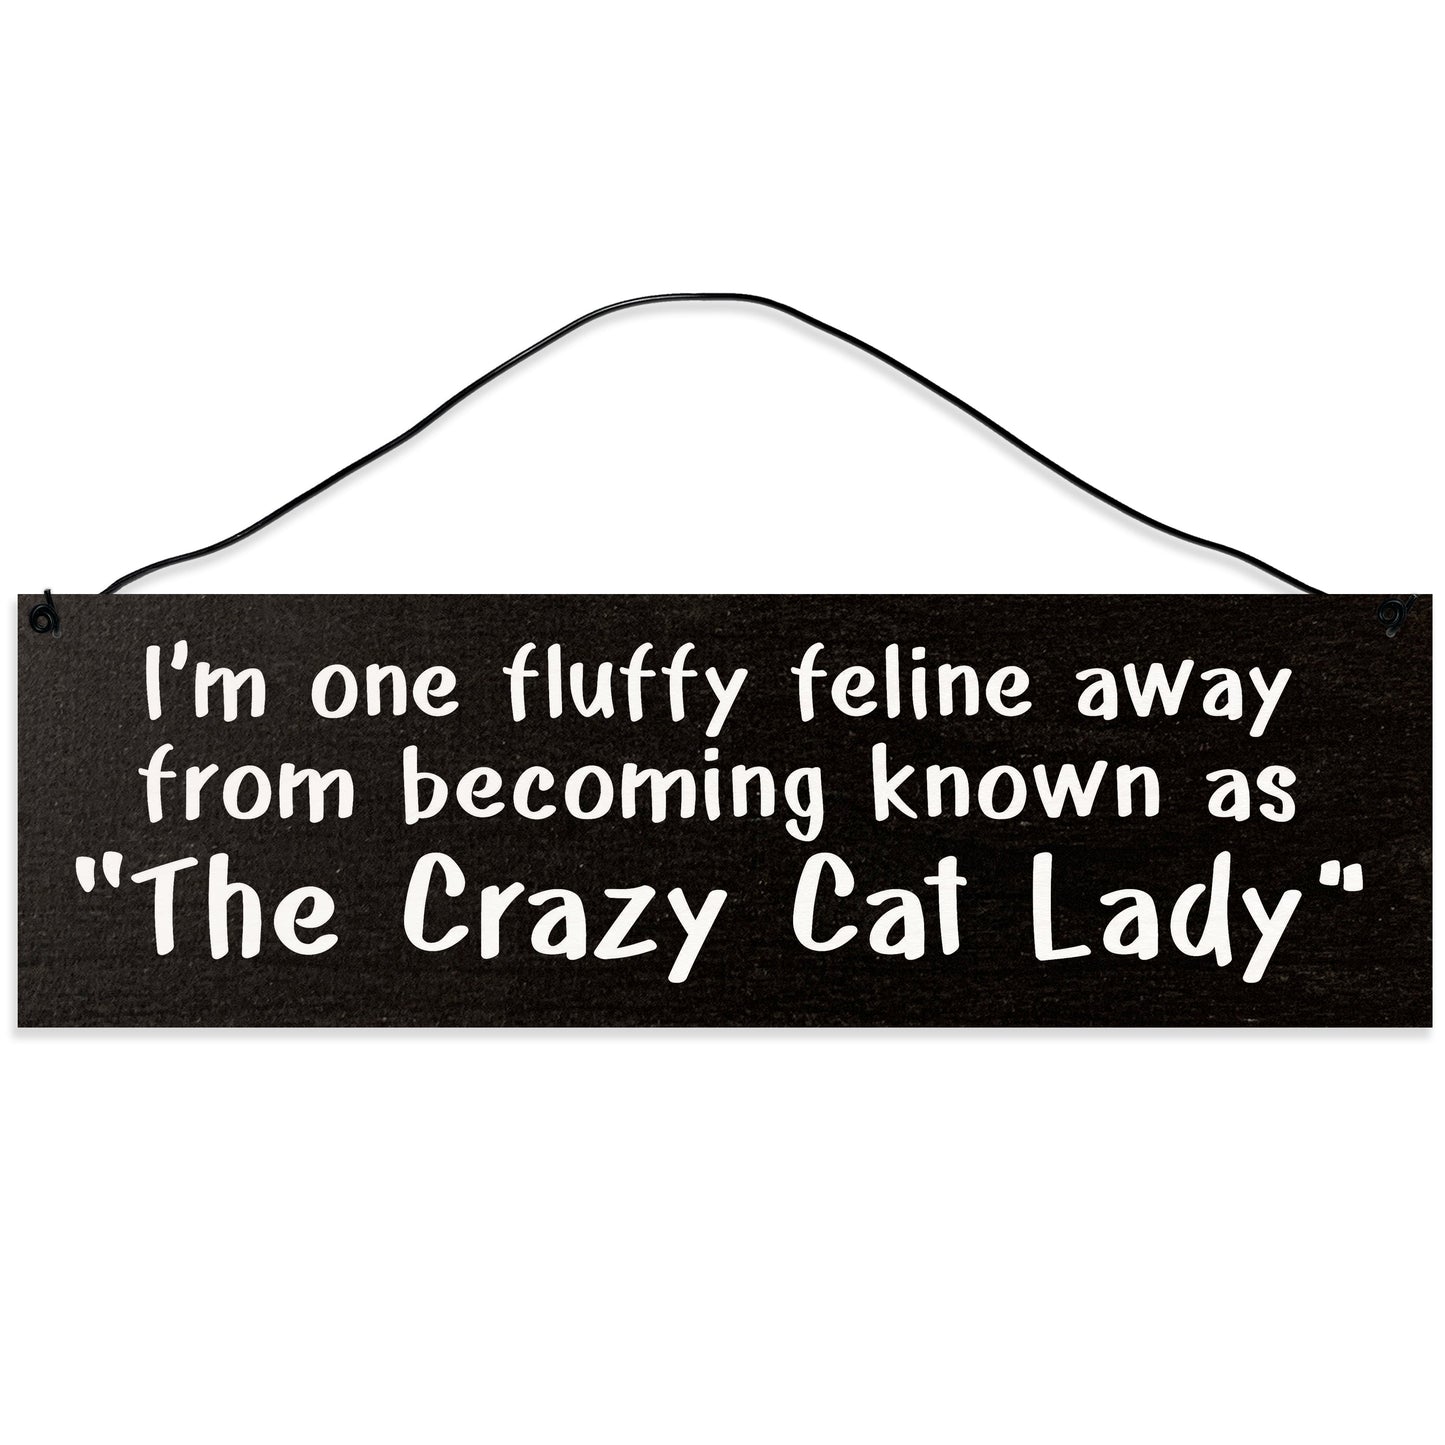 Sawyer's Mill - The Crazy Cat Lady. Wood Sign for Home or Office. Measures 3x10 inches.